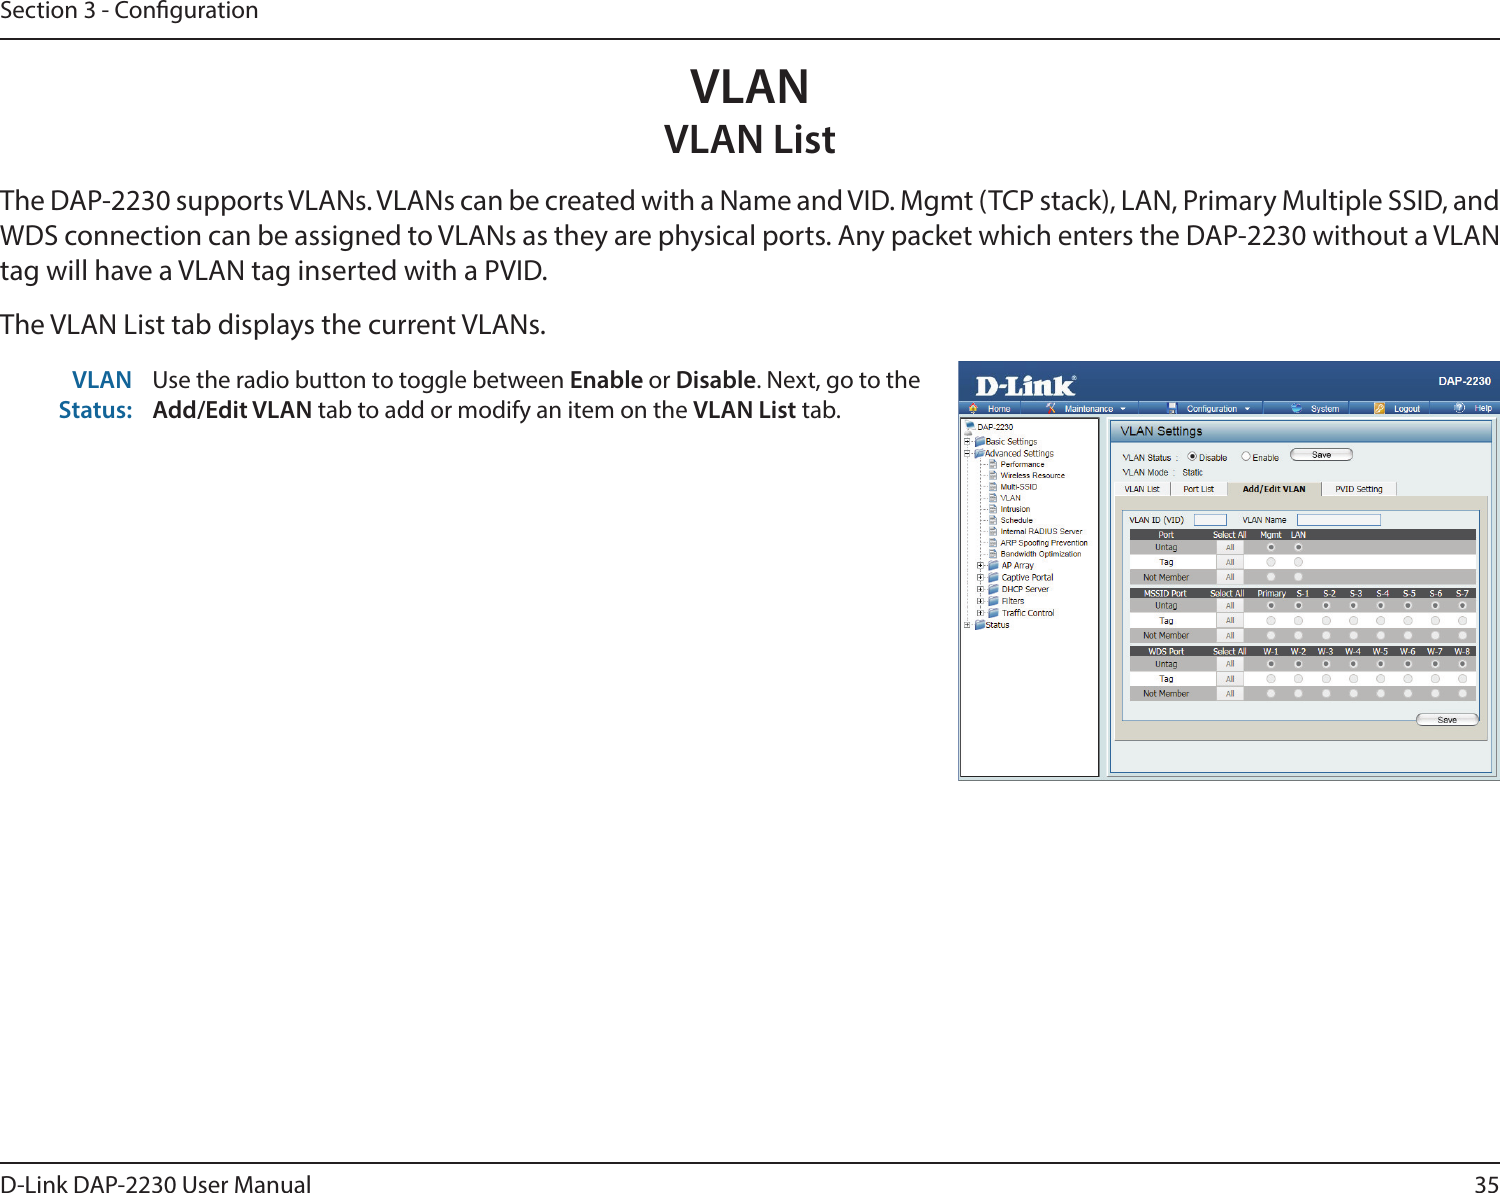 35D-Link DAP-2230 User ManualSection 3 - CongurationVLANVLAN ListThe DAP-2230 supports VLANs. VLANs can be created with a Name and VID. Mgmt (TCP stack), LAN, Primary Multiple SSID, and WDS connection can be assigned to VLANs as they are physical ports. Any packet which enters the DAP-2230 without a VLAN tag will have a VLAN tag inserted with a PVID.The VLAN List tab displays the current VLANs.VLAN Status:Use the radio button to toggle between Enable or Disable. Next, go to the Add/Edit VLAN tab to add or modify an item on the VLAN List tab.